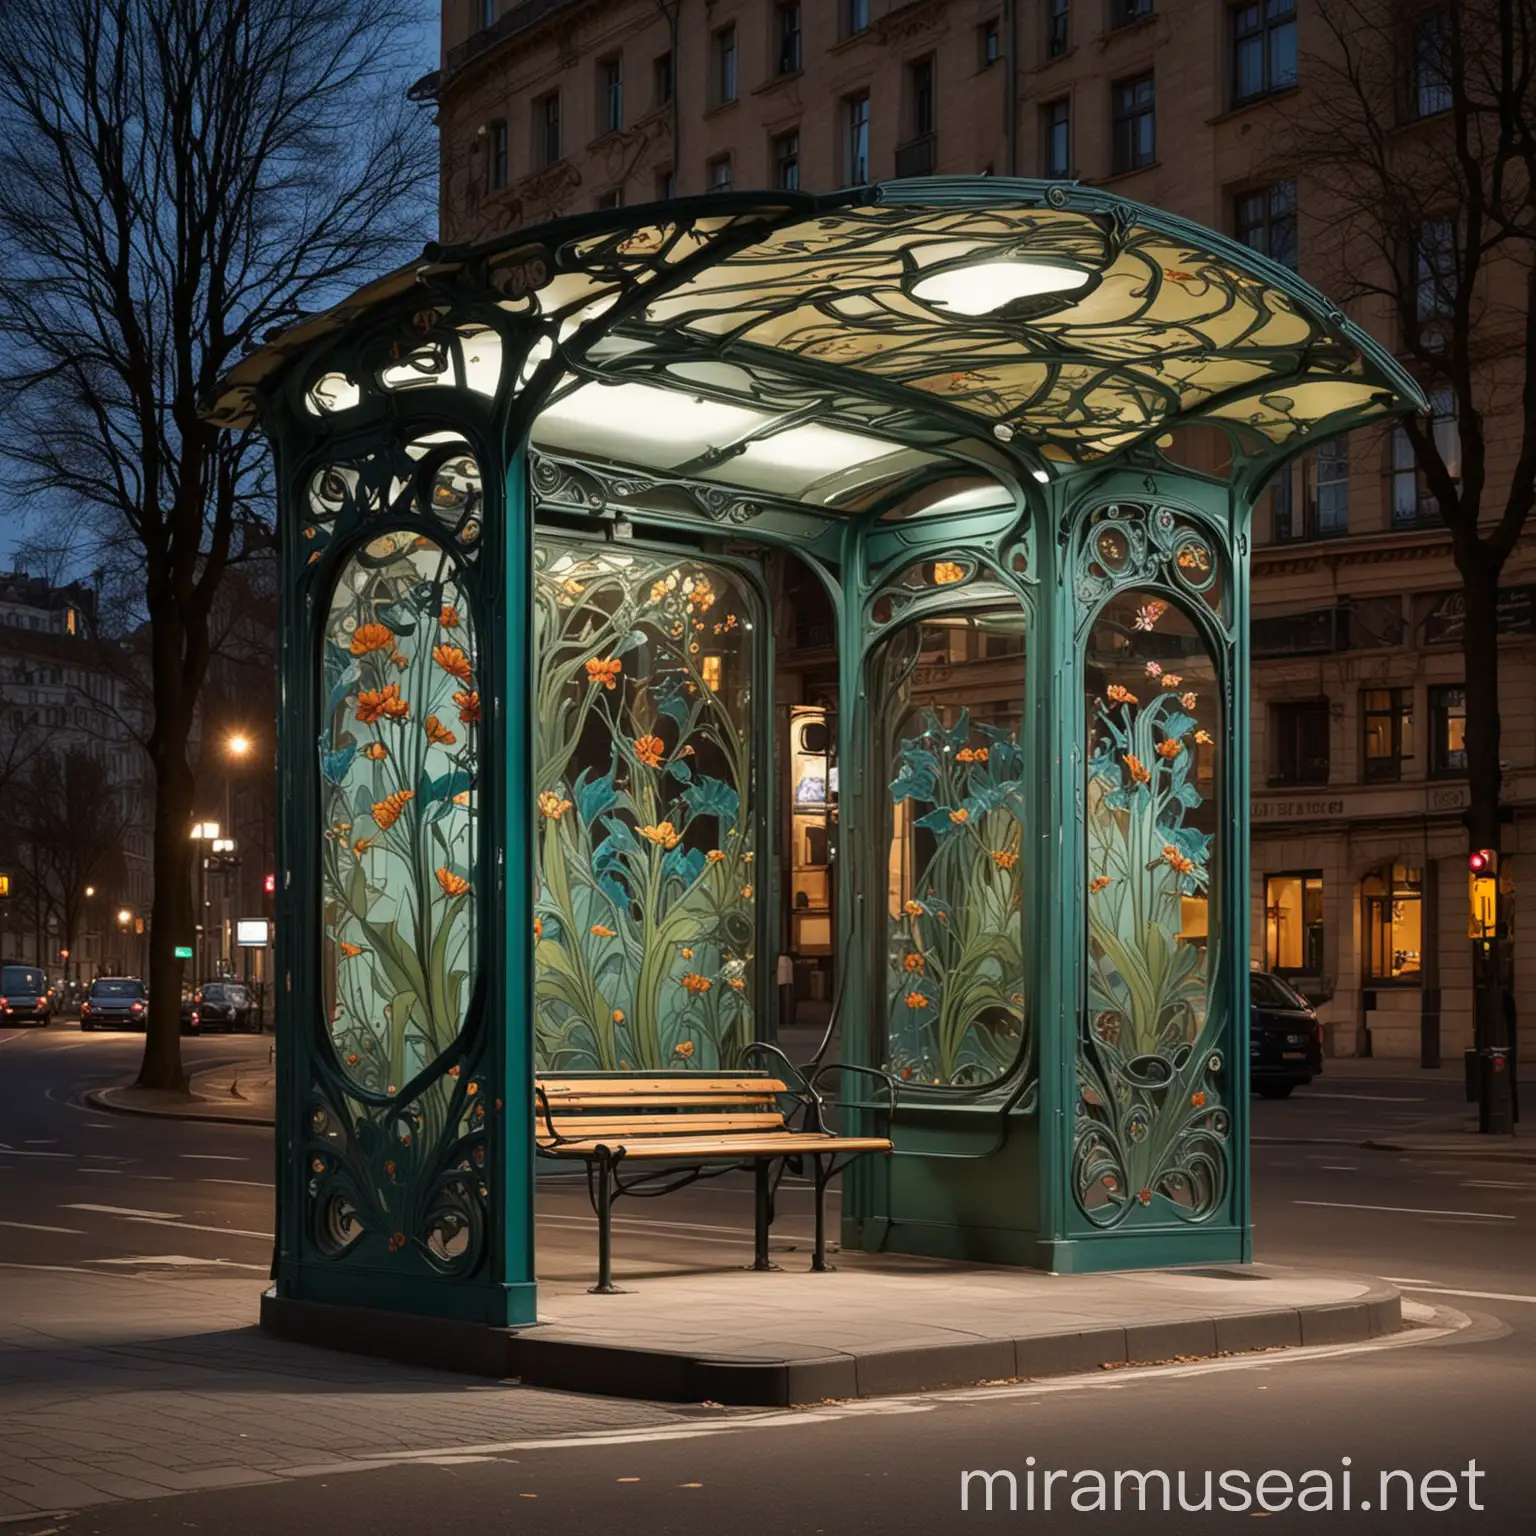 Art NouveauInspired Modern Big Bus Stops Contemporary Urban Landscapes Transformed into Nighttime Icons